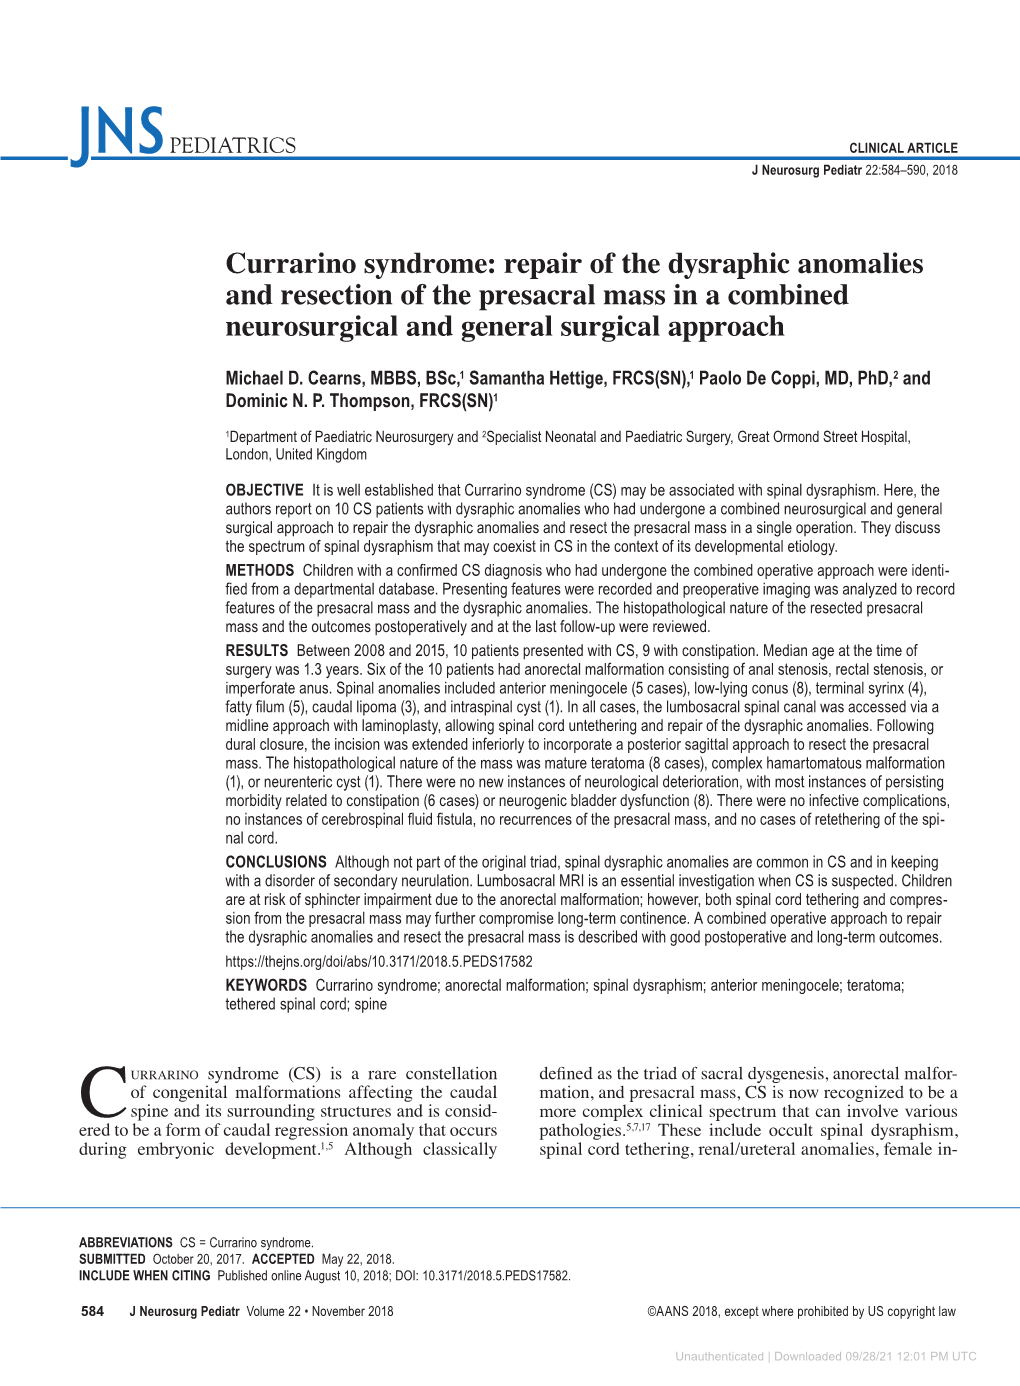 Currarino Syndrome: Repair of the Dysraphic Anomalies and Resection of the Presacral Mass in a Combined Neurosurgical and General Surgical Approach